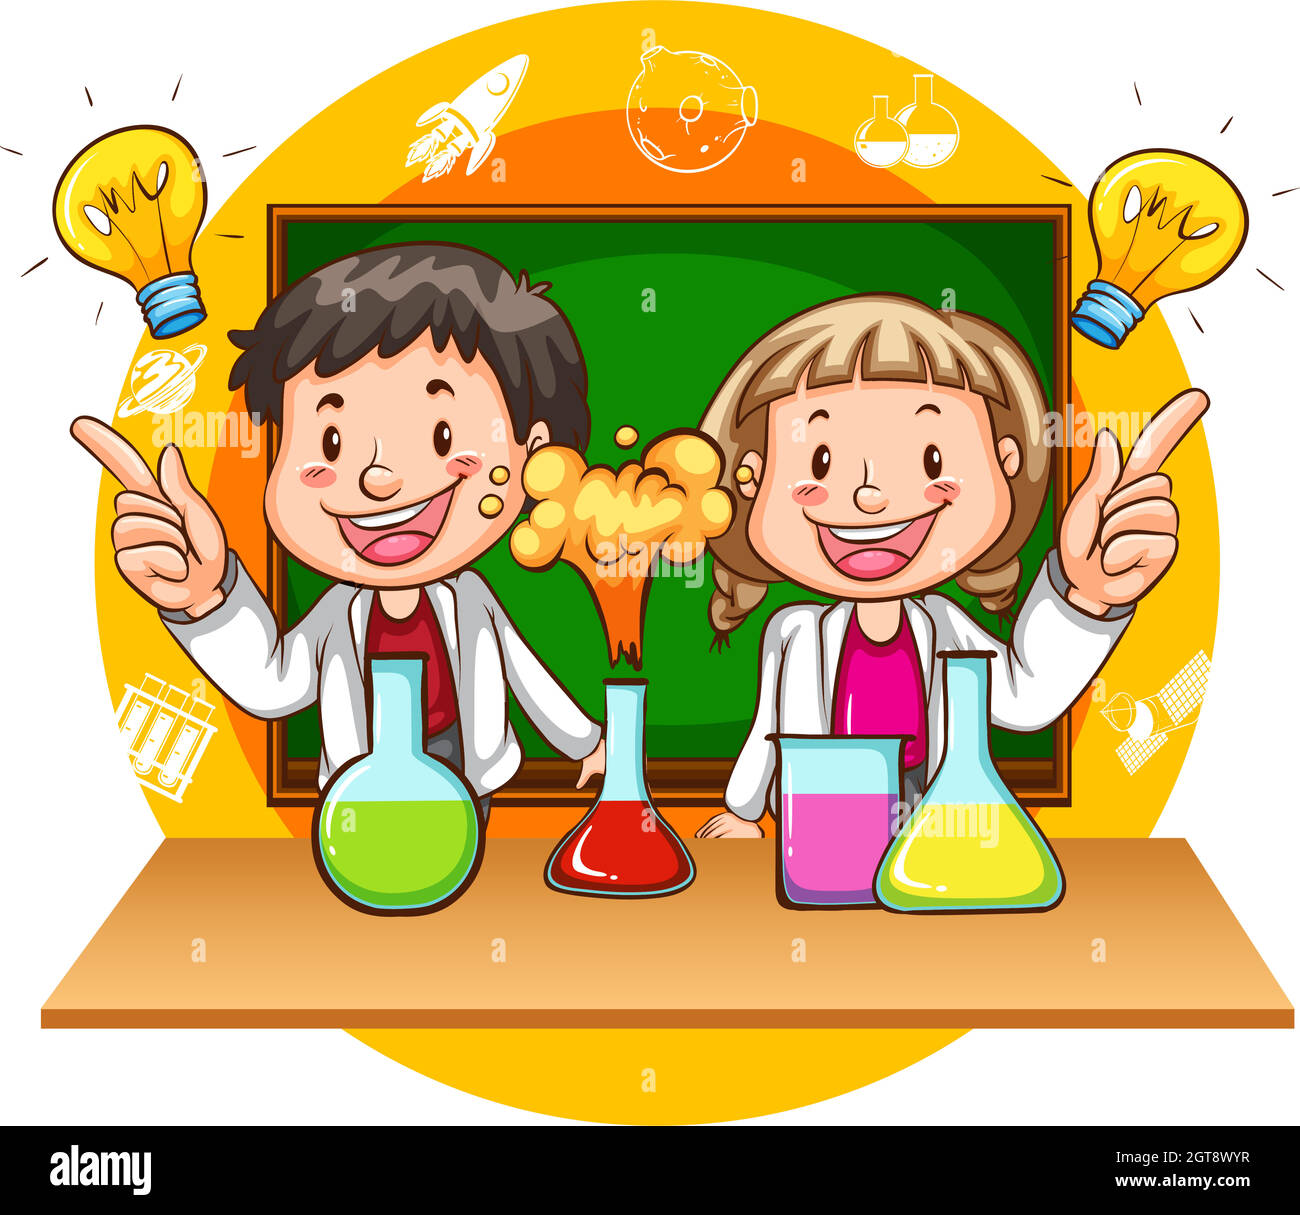 Boy and girl doing science experiment Stock Vector